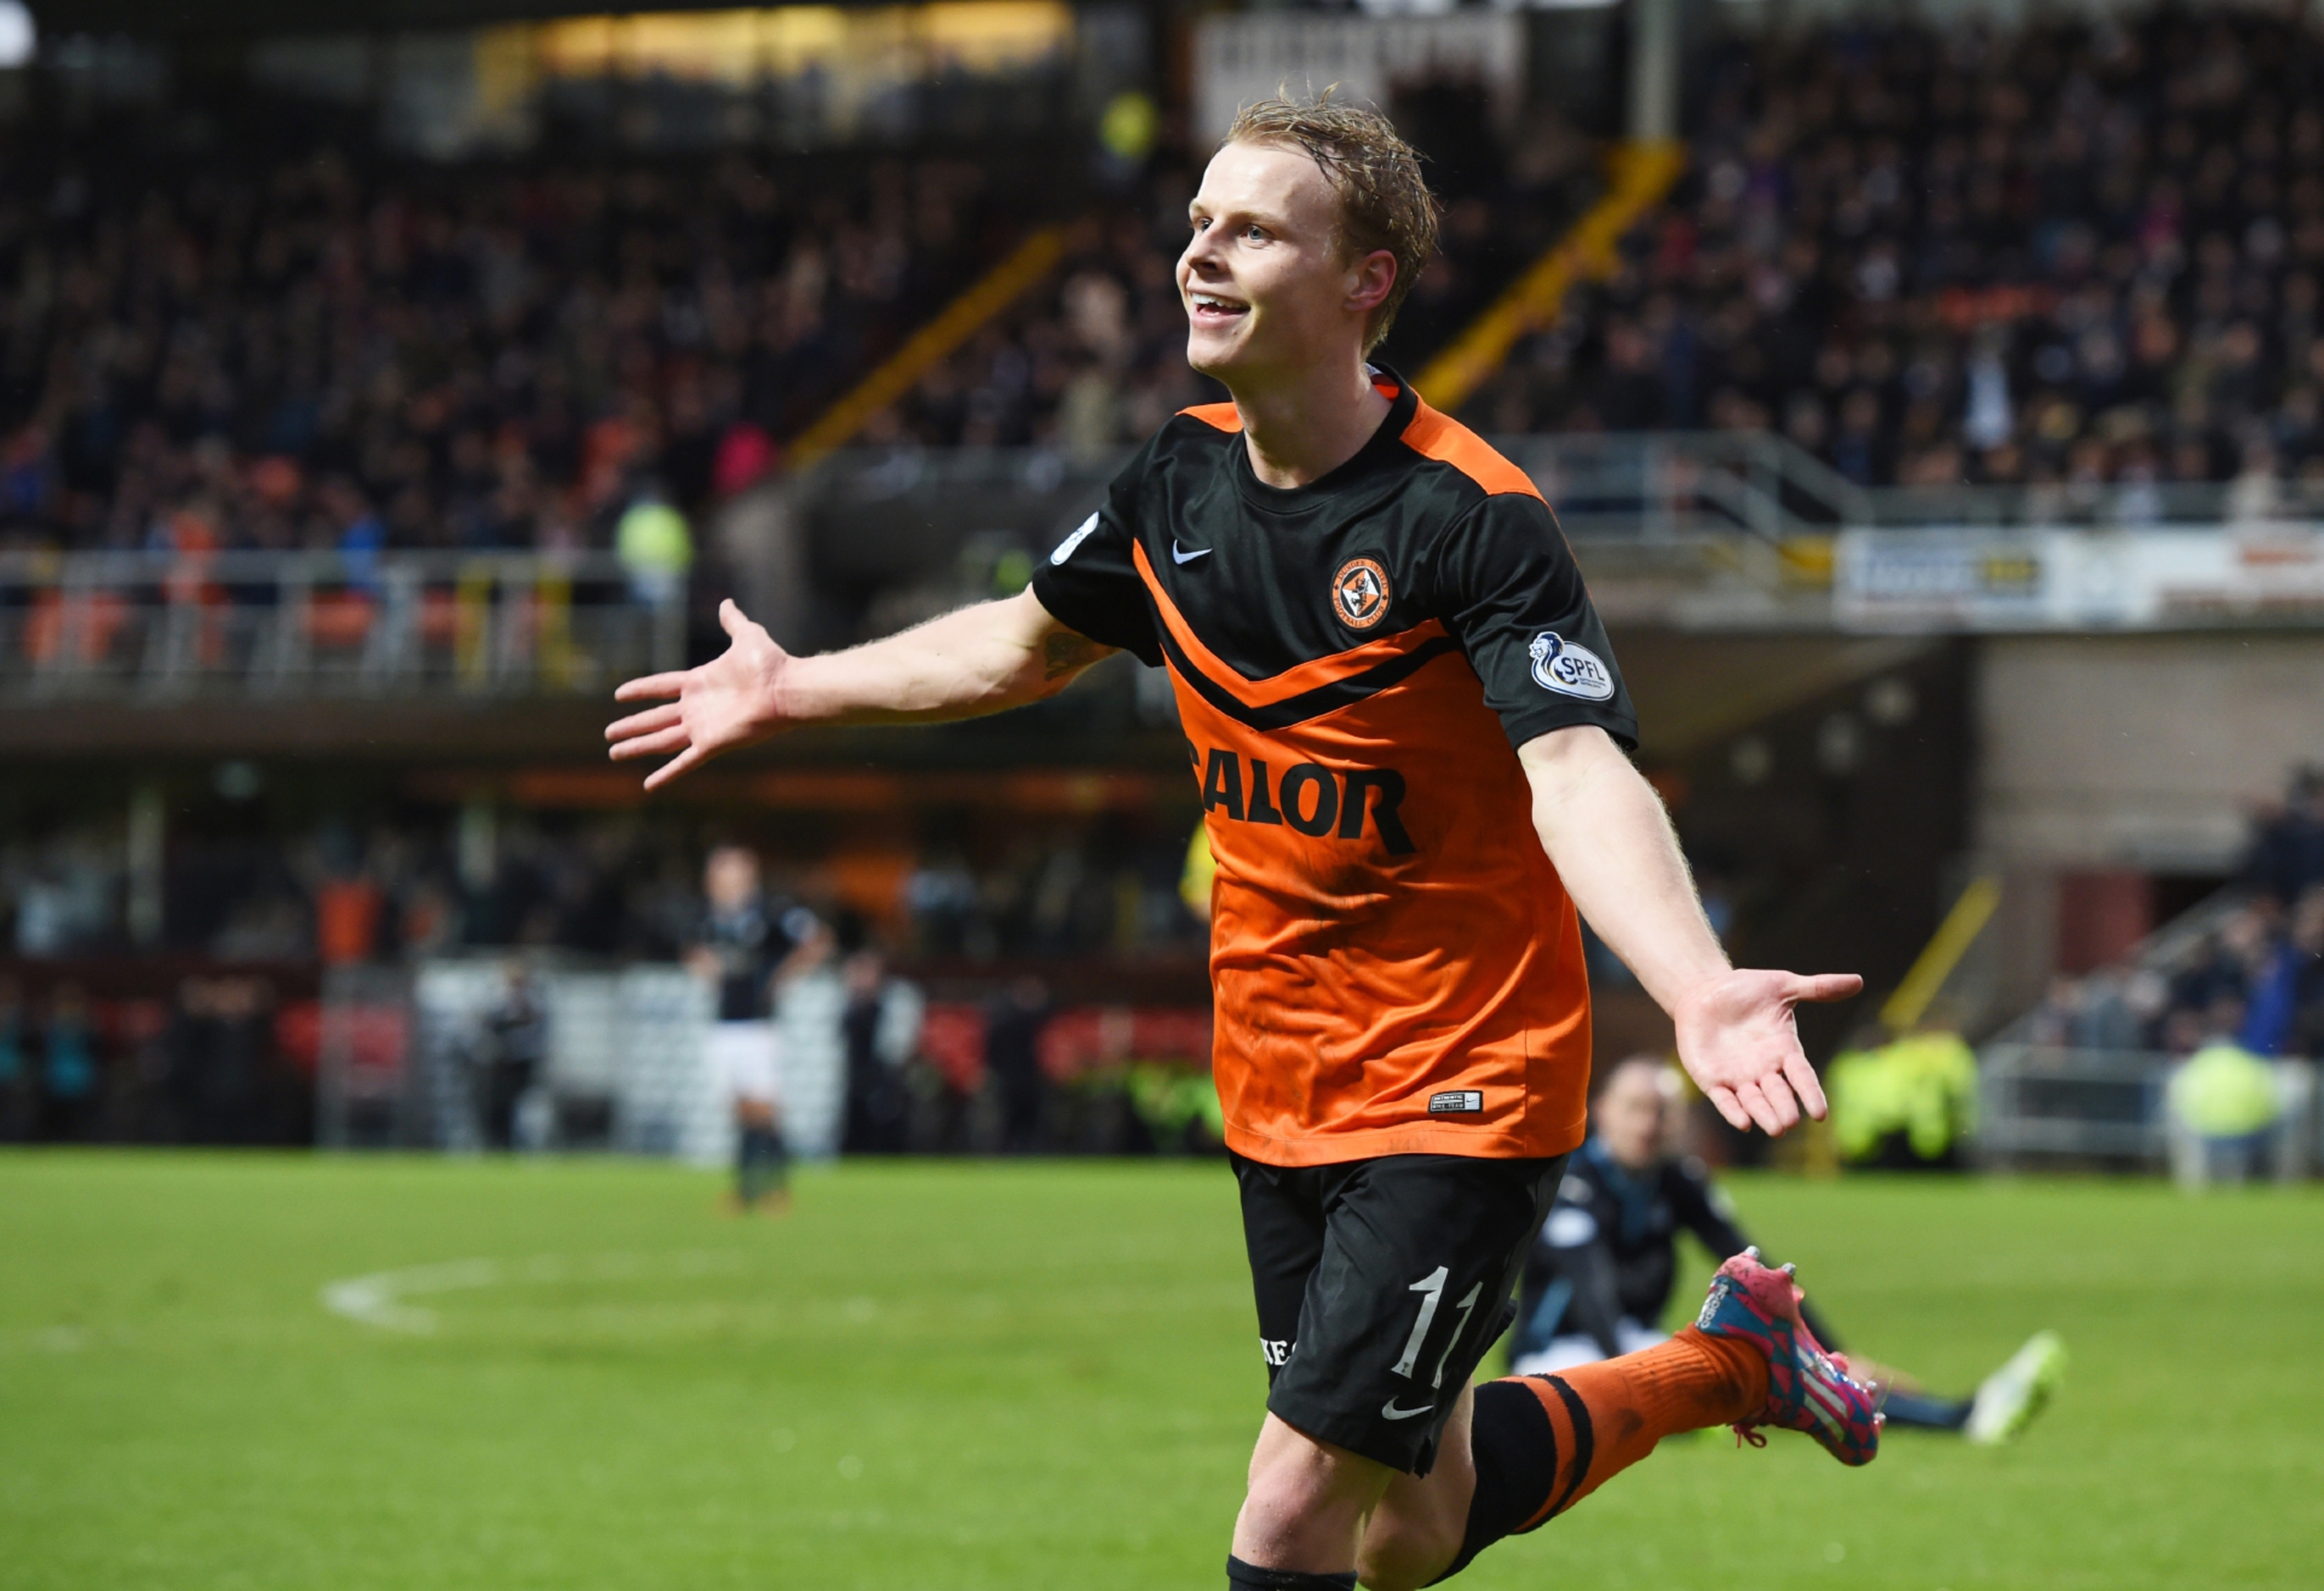 Happier days for United as Gary Mackay-Steven scores the fourth goal in the 6-2 win over Dundee.